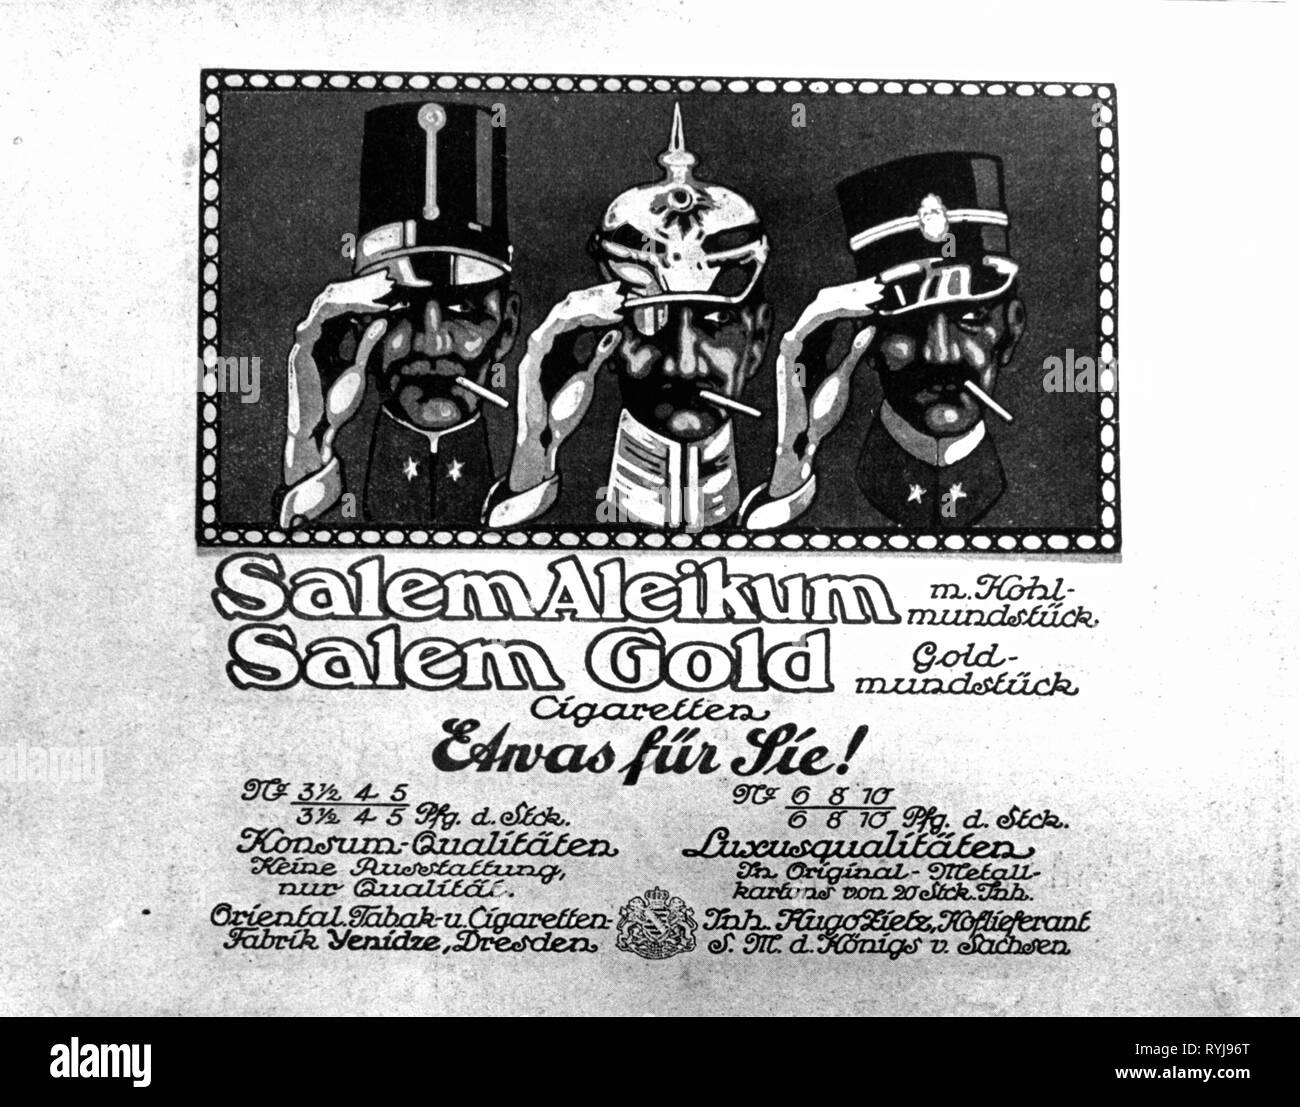 advertising, tobacco advertising, Salem Aleikum and Salem Gold cigarettes, cigarette factory Yenidze, Dresden, slogan: Something for You, advertising poster, Germany, 1913, Additional-Rights-Clearance-Info-Not-Available Stock Photo